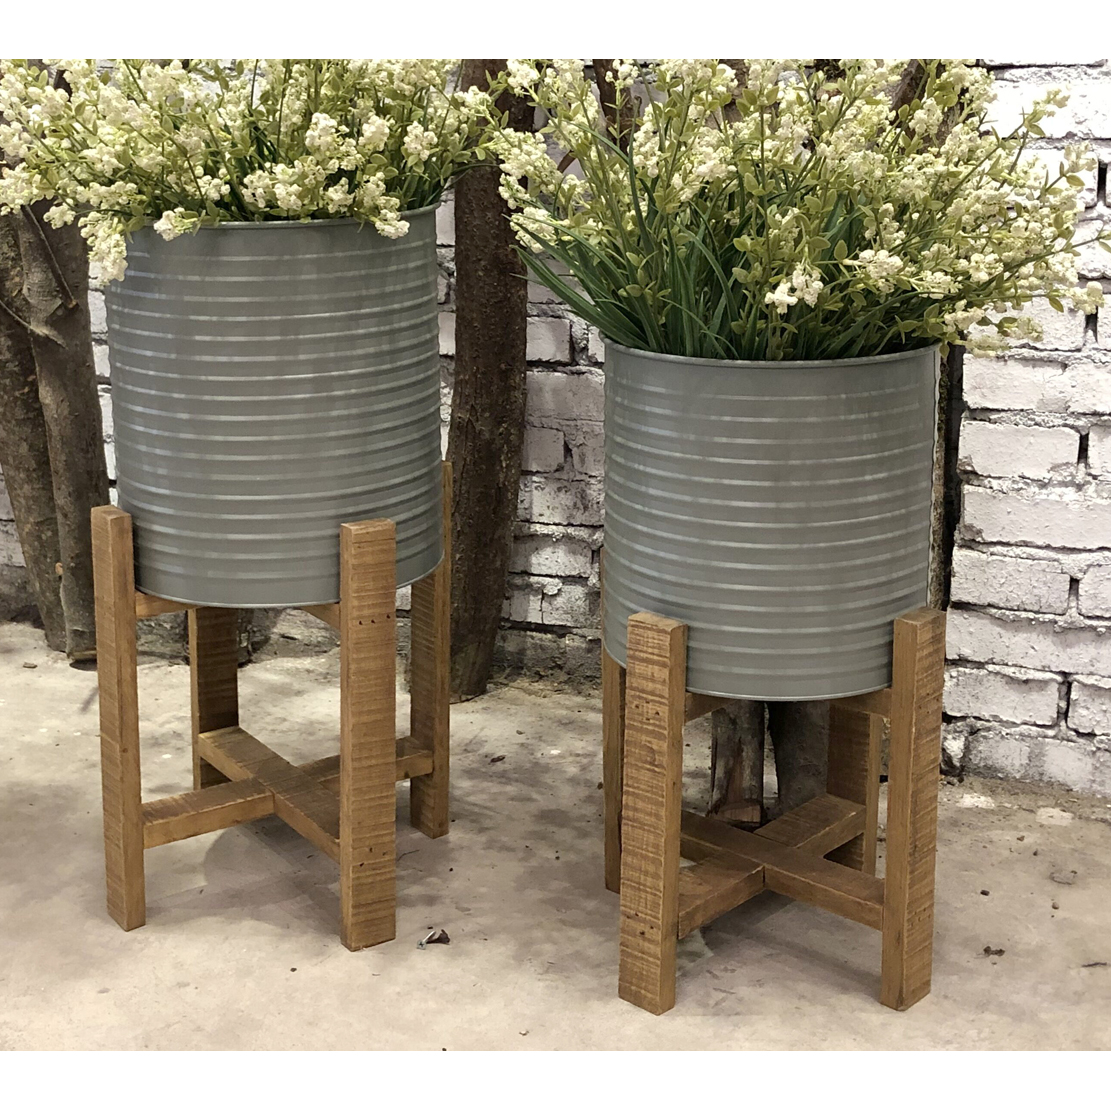 S/2 metal planter with wood stand